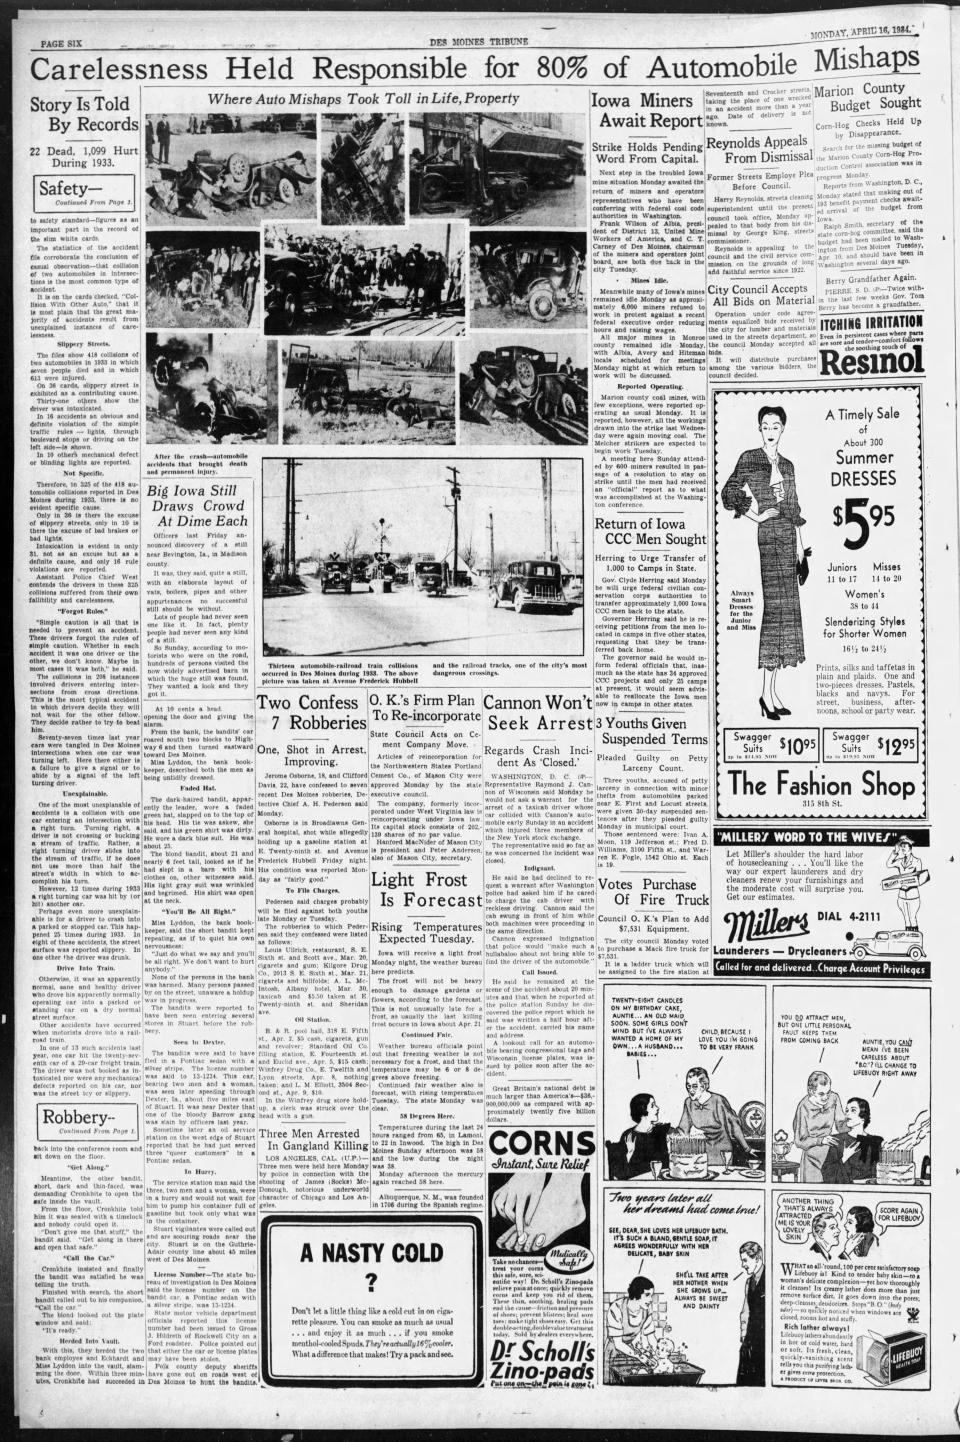 Page 6 of the April 16, 1934, issue of the Des Moines Register and Tribune continues the story of the robbery of a Stuart bank by the Barrow Gang.